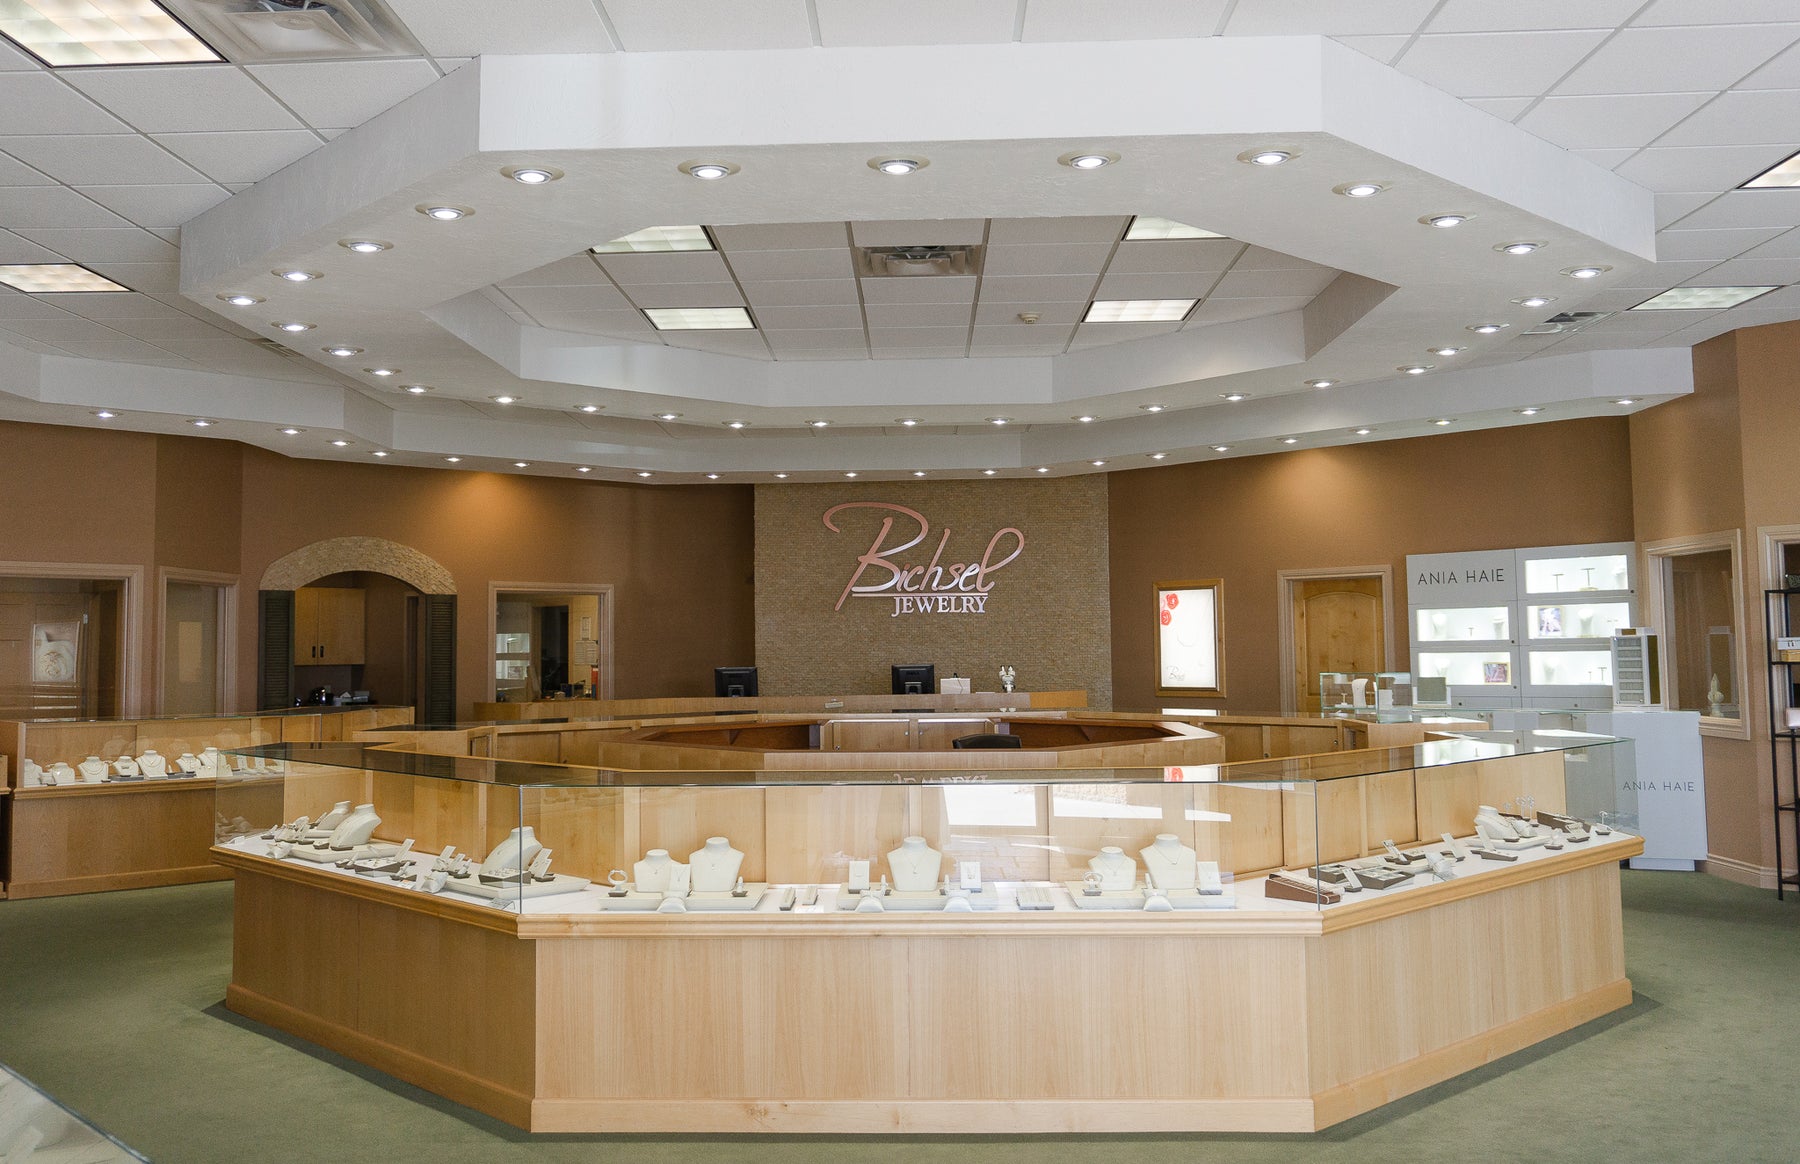 Bichsel Jewelry Store in Sedalia, MO. Providing fine jewelry, engagement rings, and quality services since 1865.